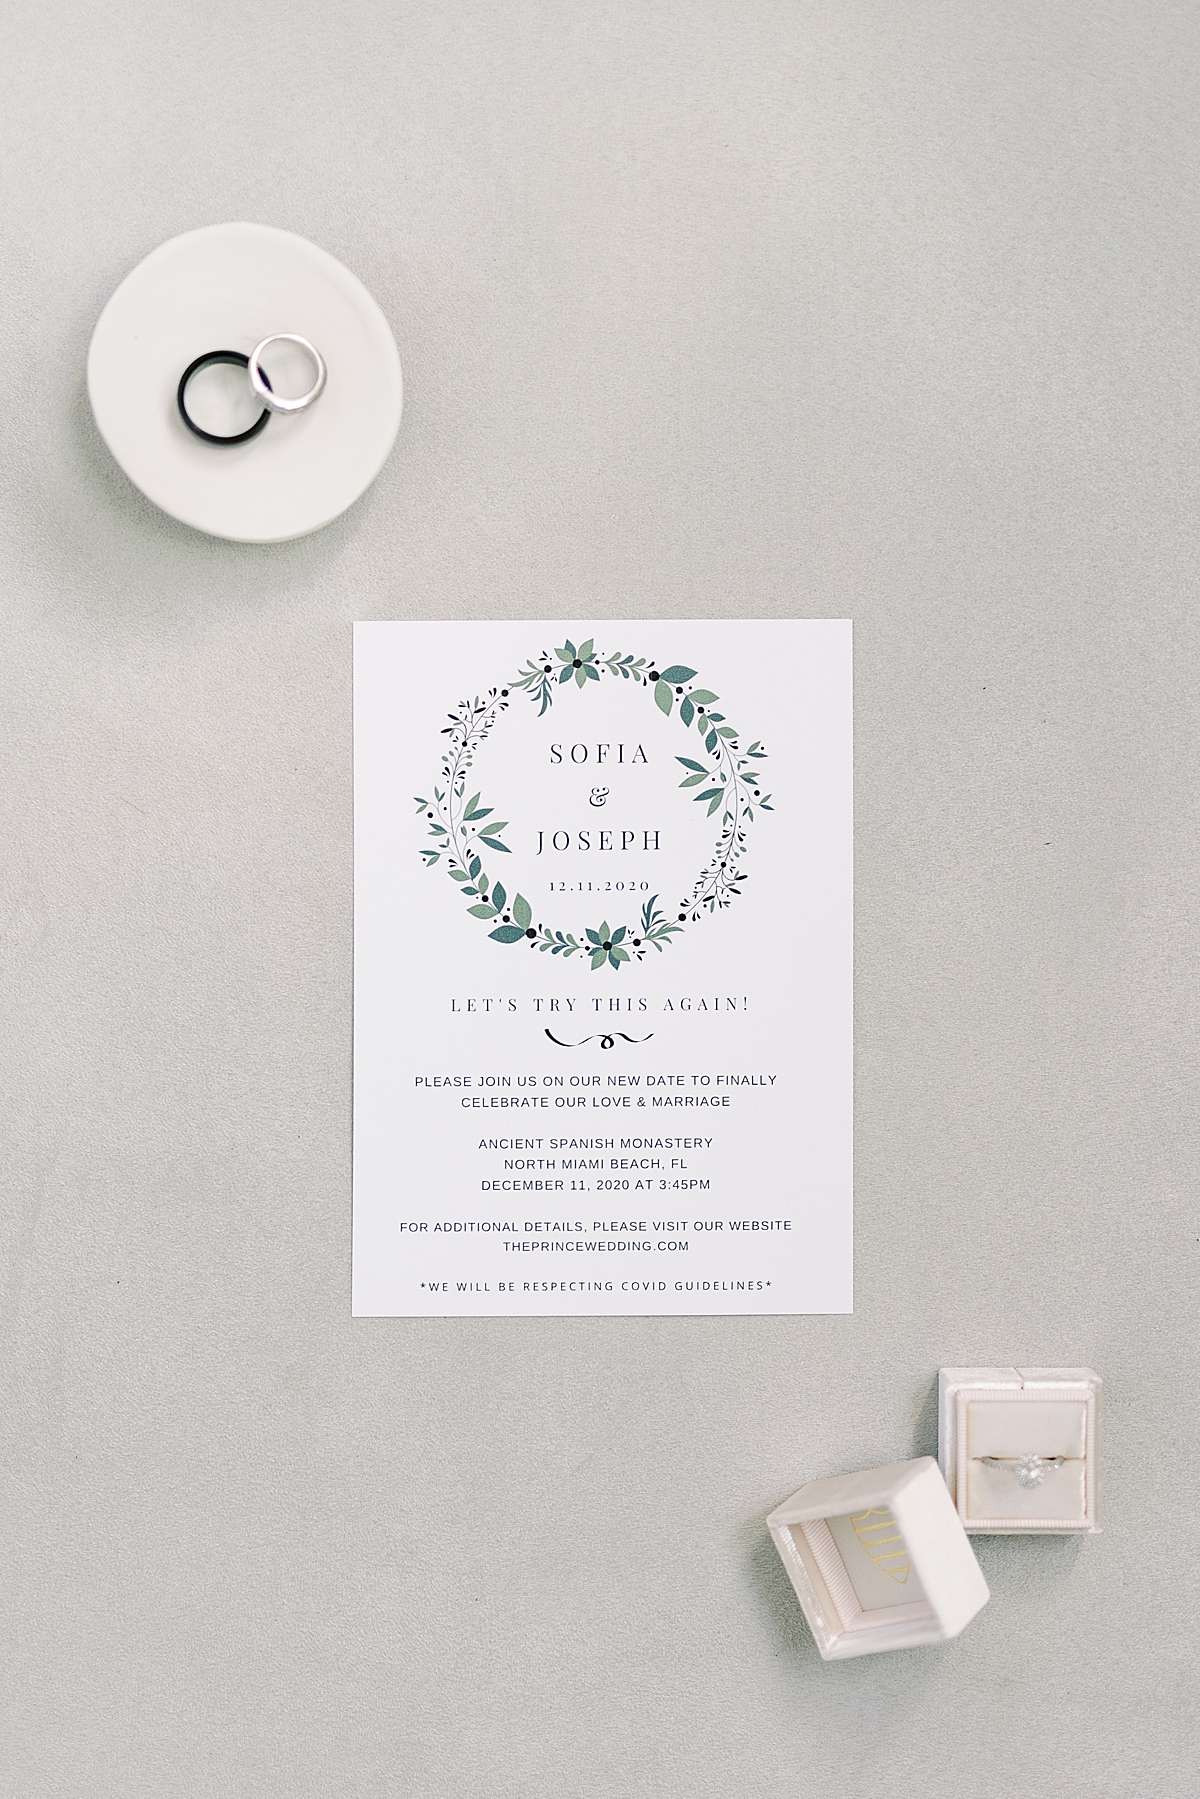 Sofia & Joey's invitation to their guests for their Ancient Spanish Monastery Wedding